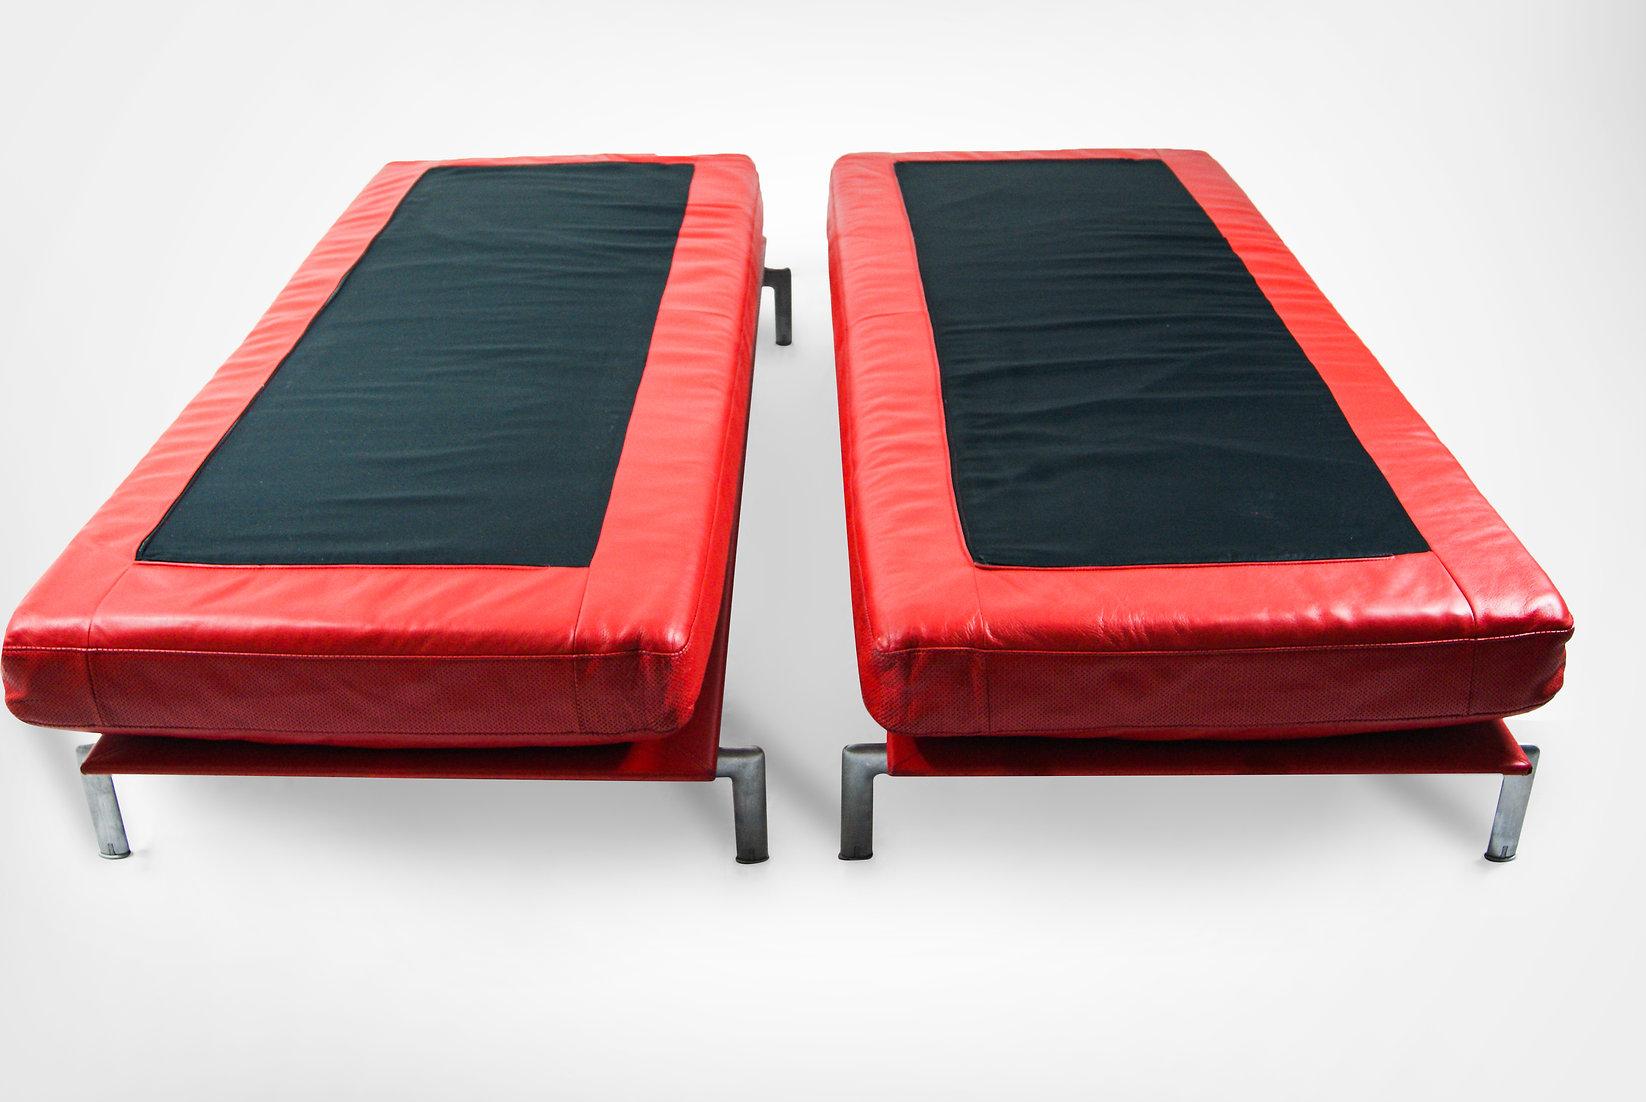 Steel Pair Diesis Daybeds or Benches by Paolo Nava & Antonio Citterio for B&B Italia For Sale